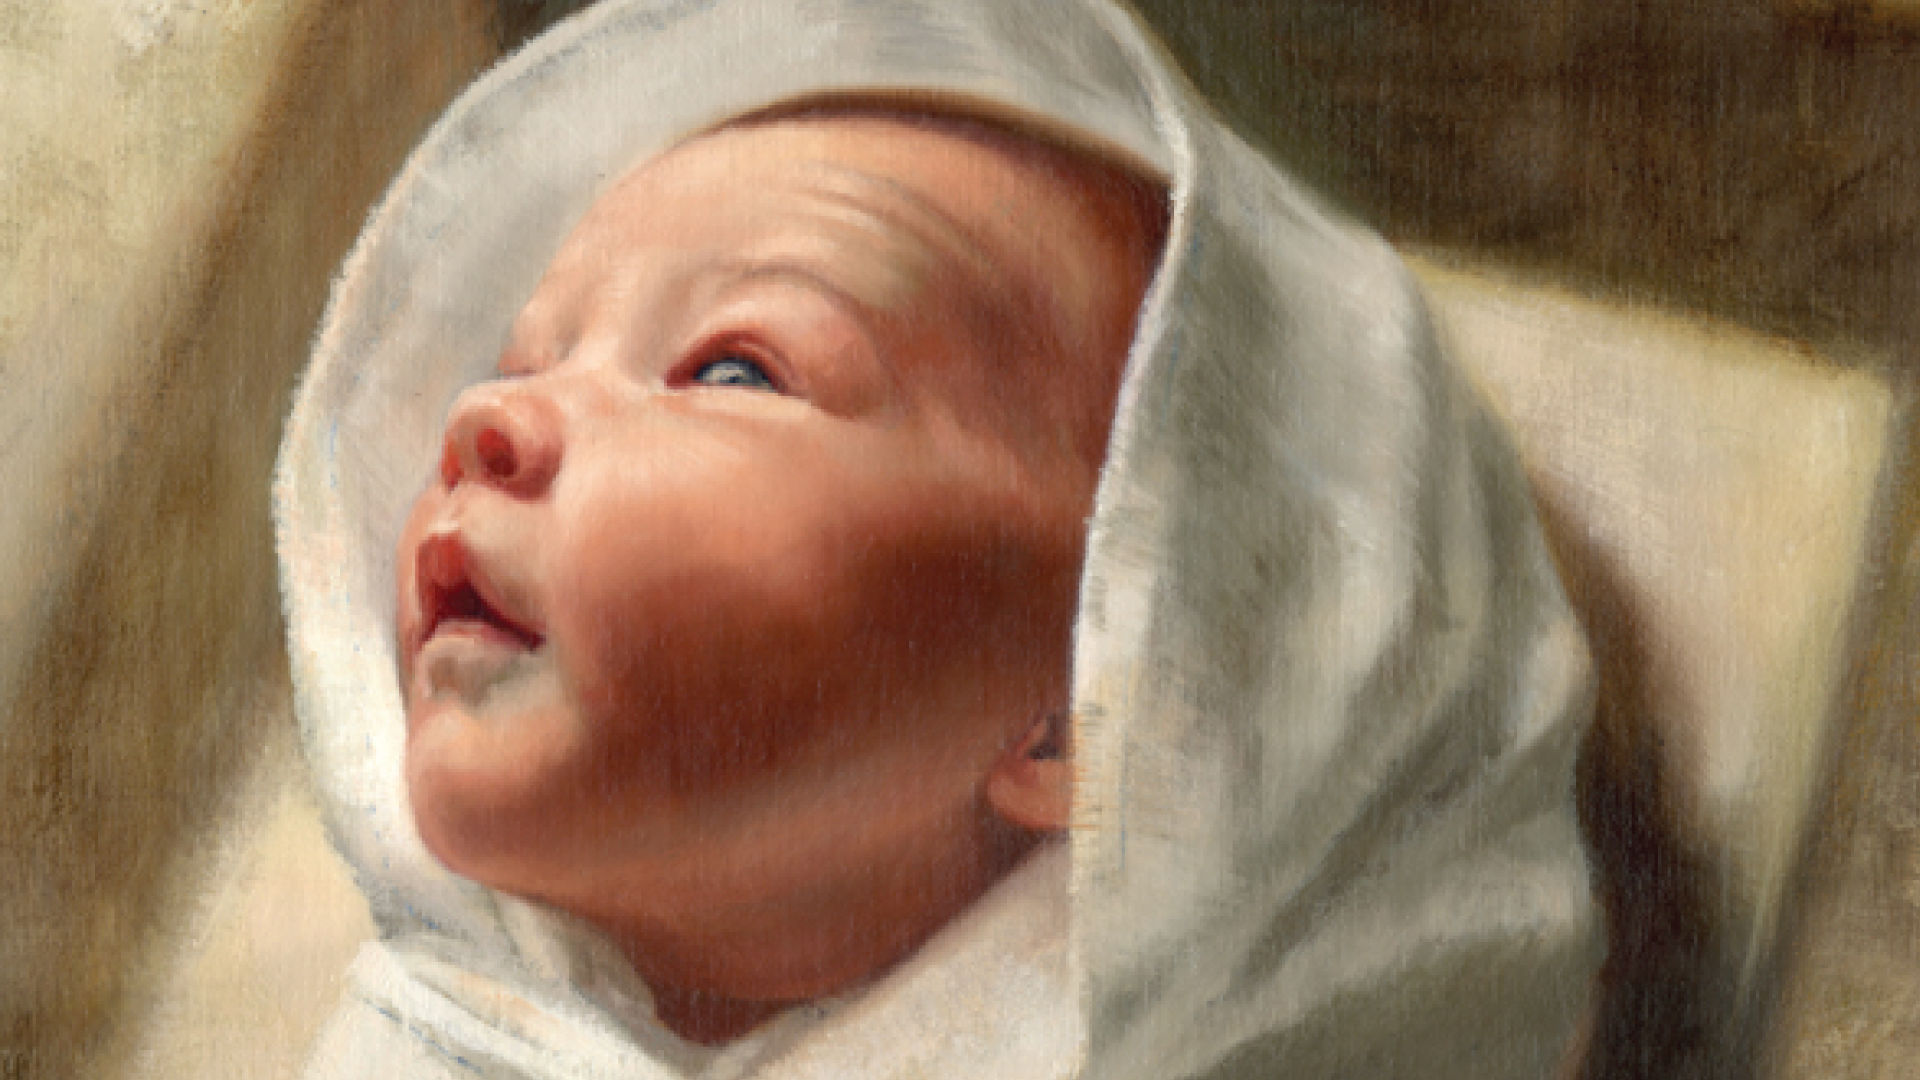 Jenedy Paige's painting, "Little Lamb," showing Jesus Christ as a baby